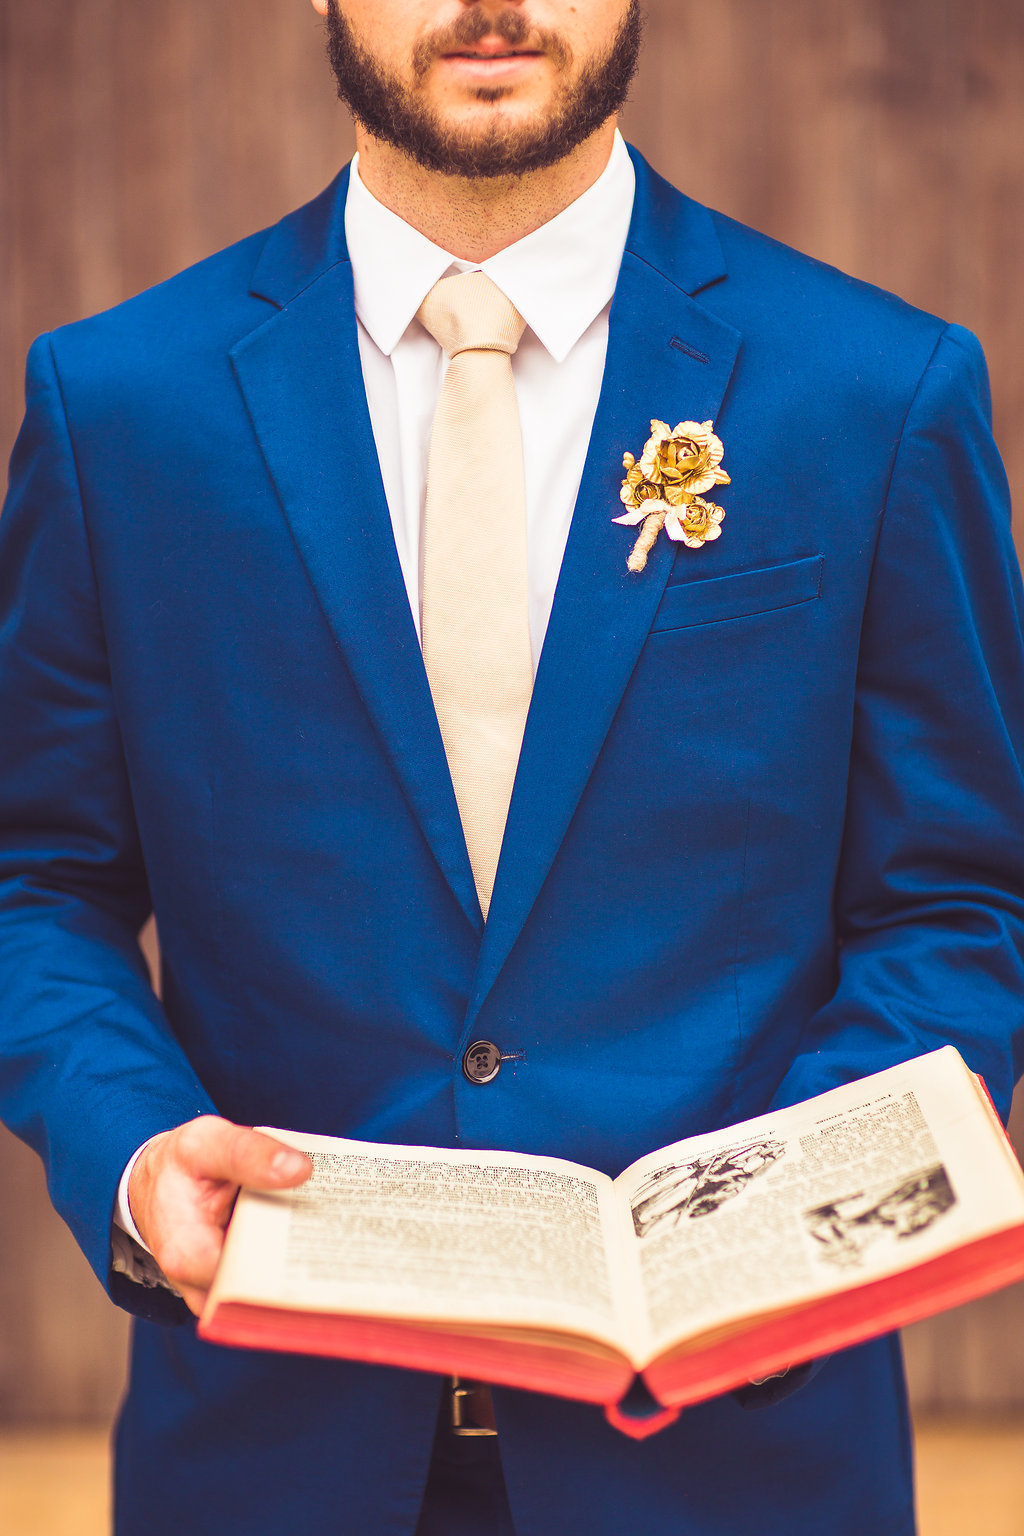 Wedding Photograph Of a Man in Blue Suit Holding a Book Los Angeles